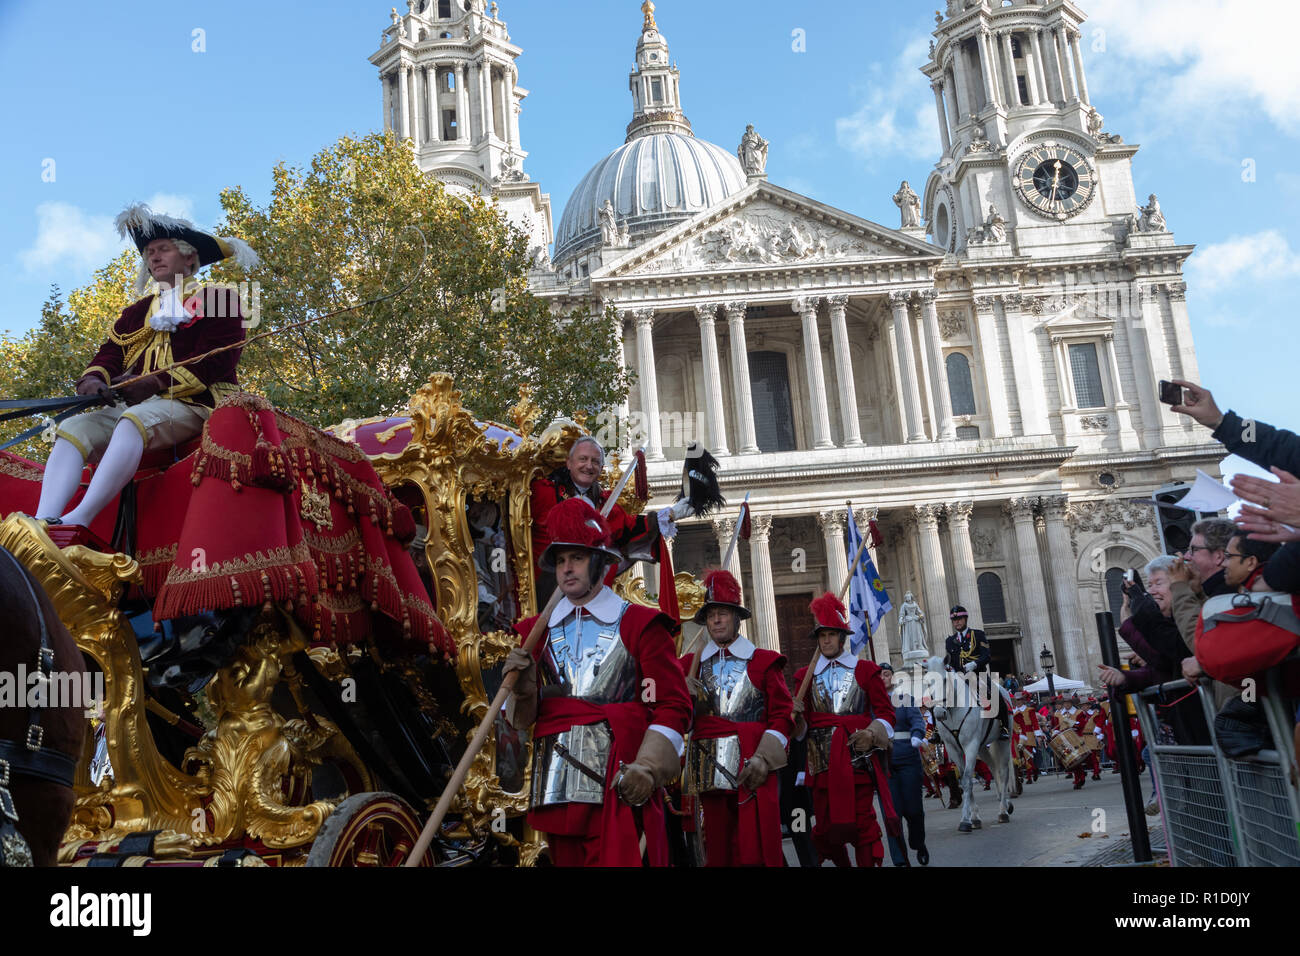 London, UK. 10 Nov, 2018. The procession for the Lord Mayor's Show  marks the swearing in of the newly elected Lord Mayor of London. This year it is P Stock Photo